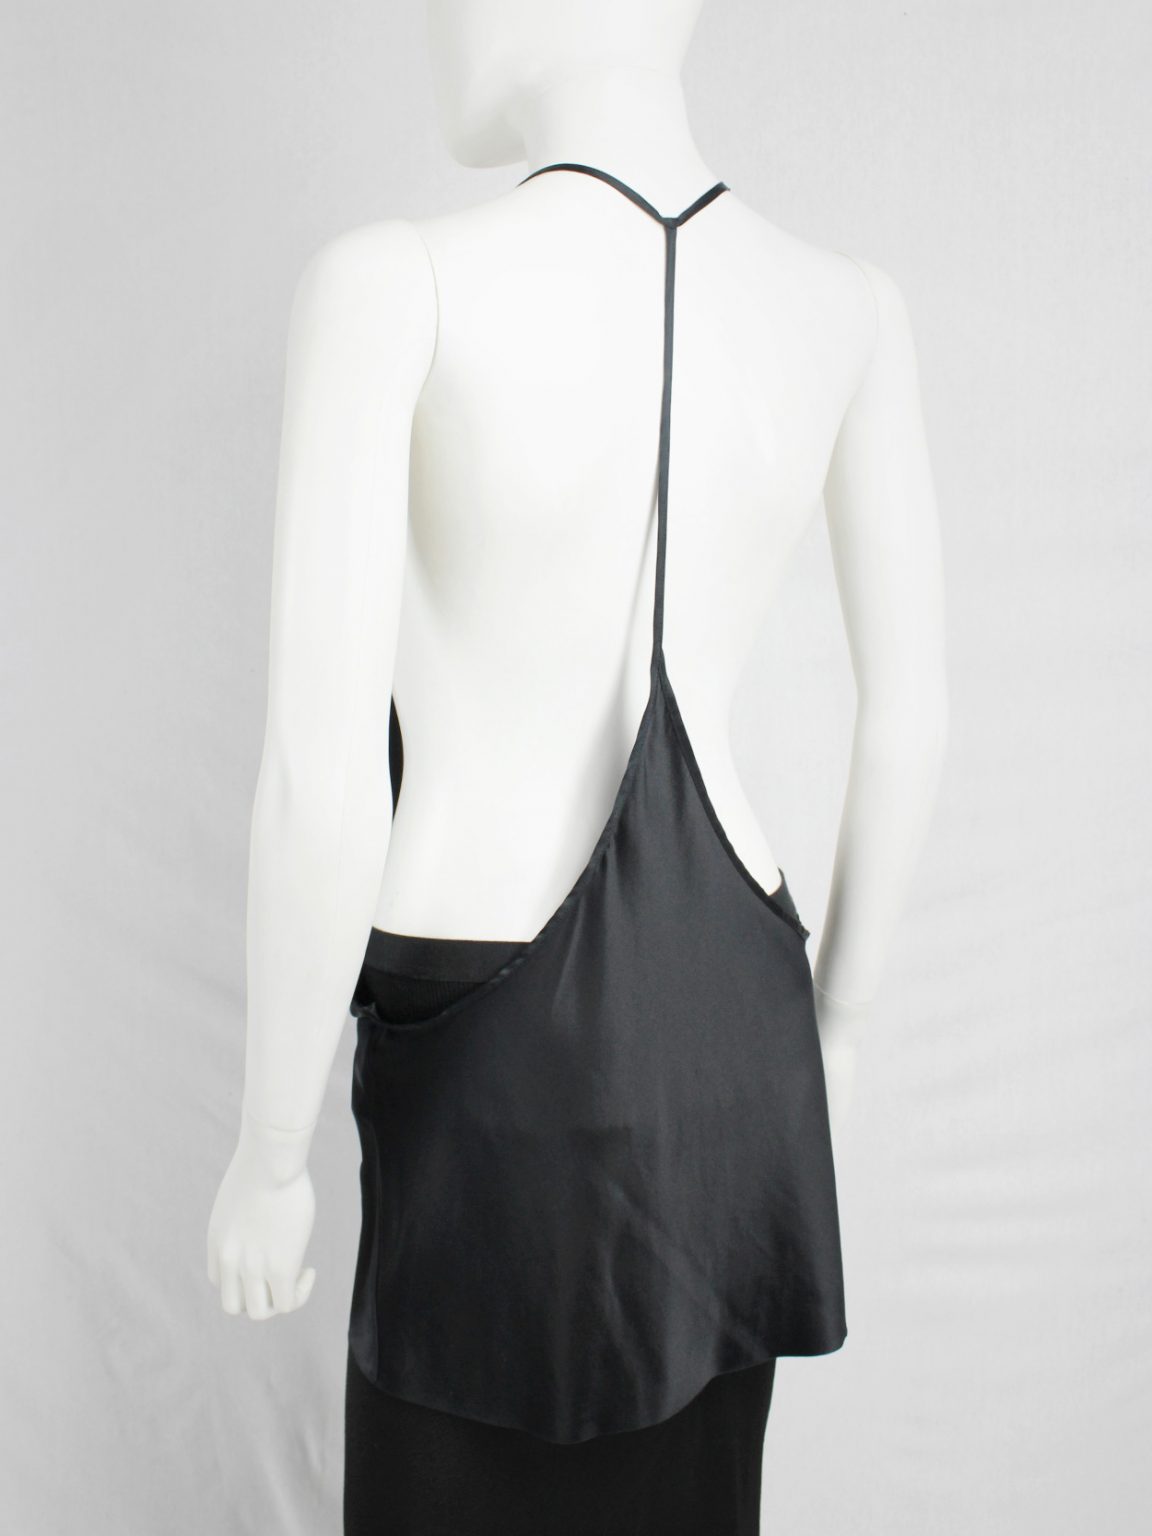 Ann Demeulemeester black backless top with minimalist strap — spring 2010